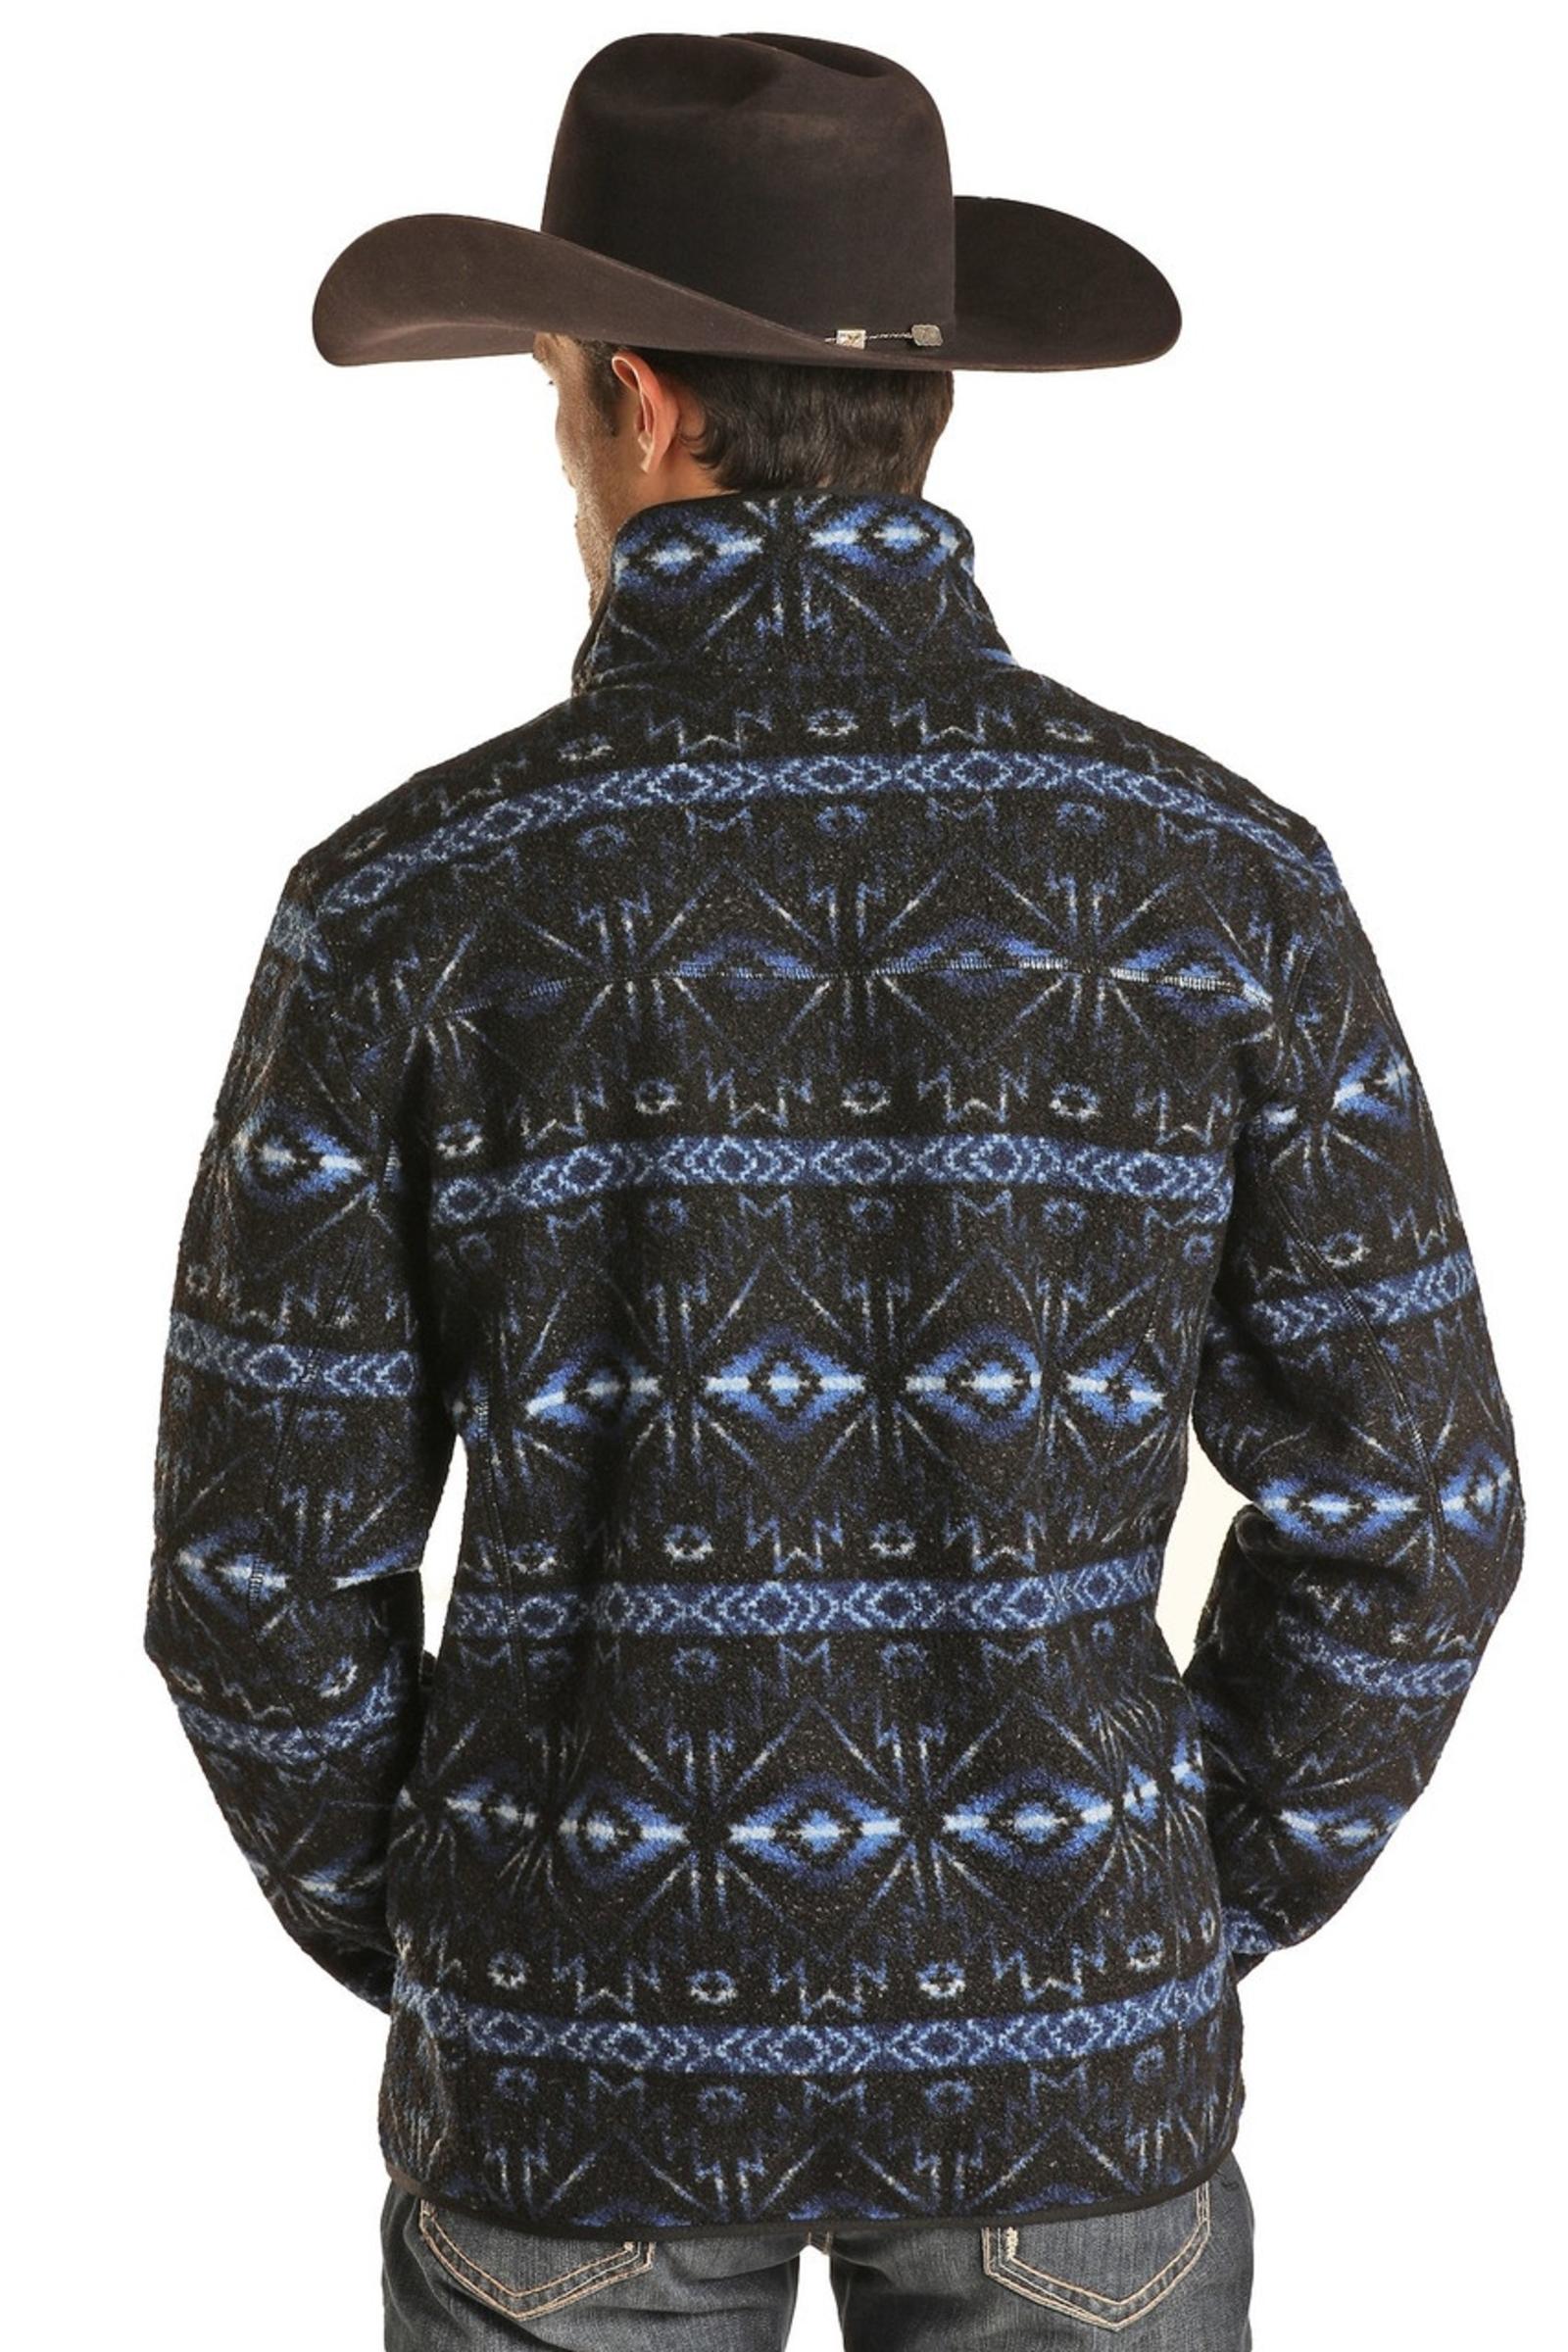 Rock and Roll Denim Aztec Pullover